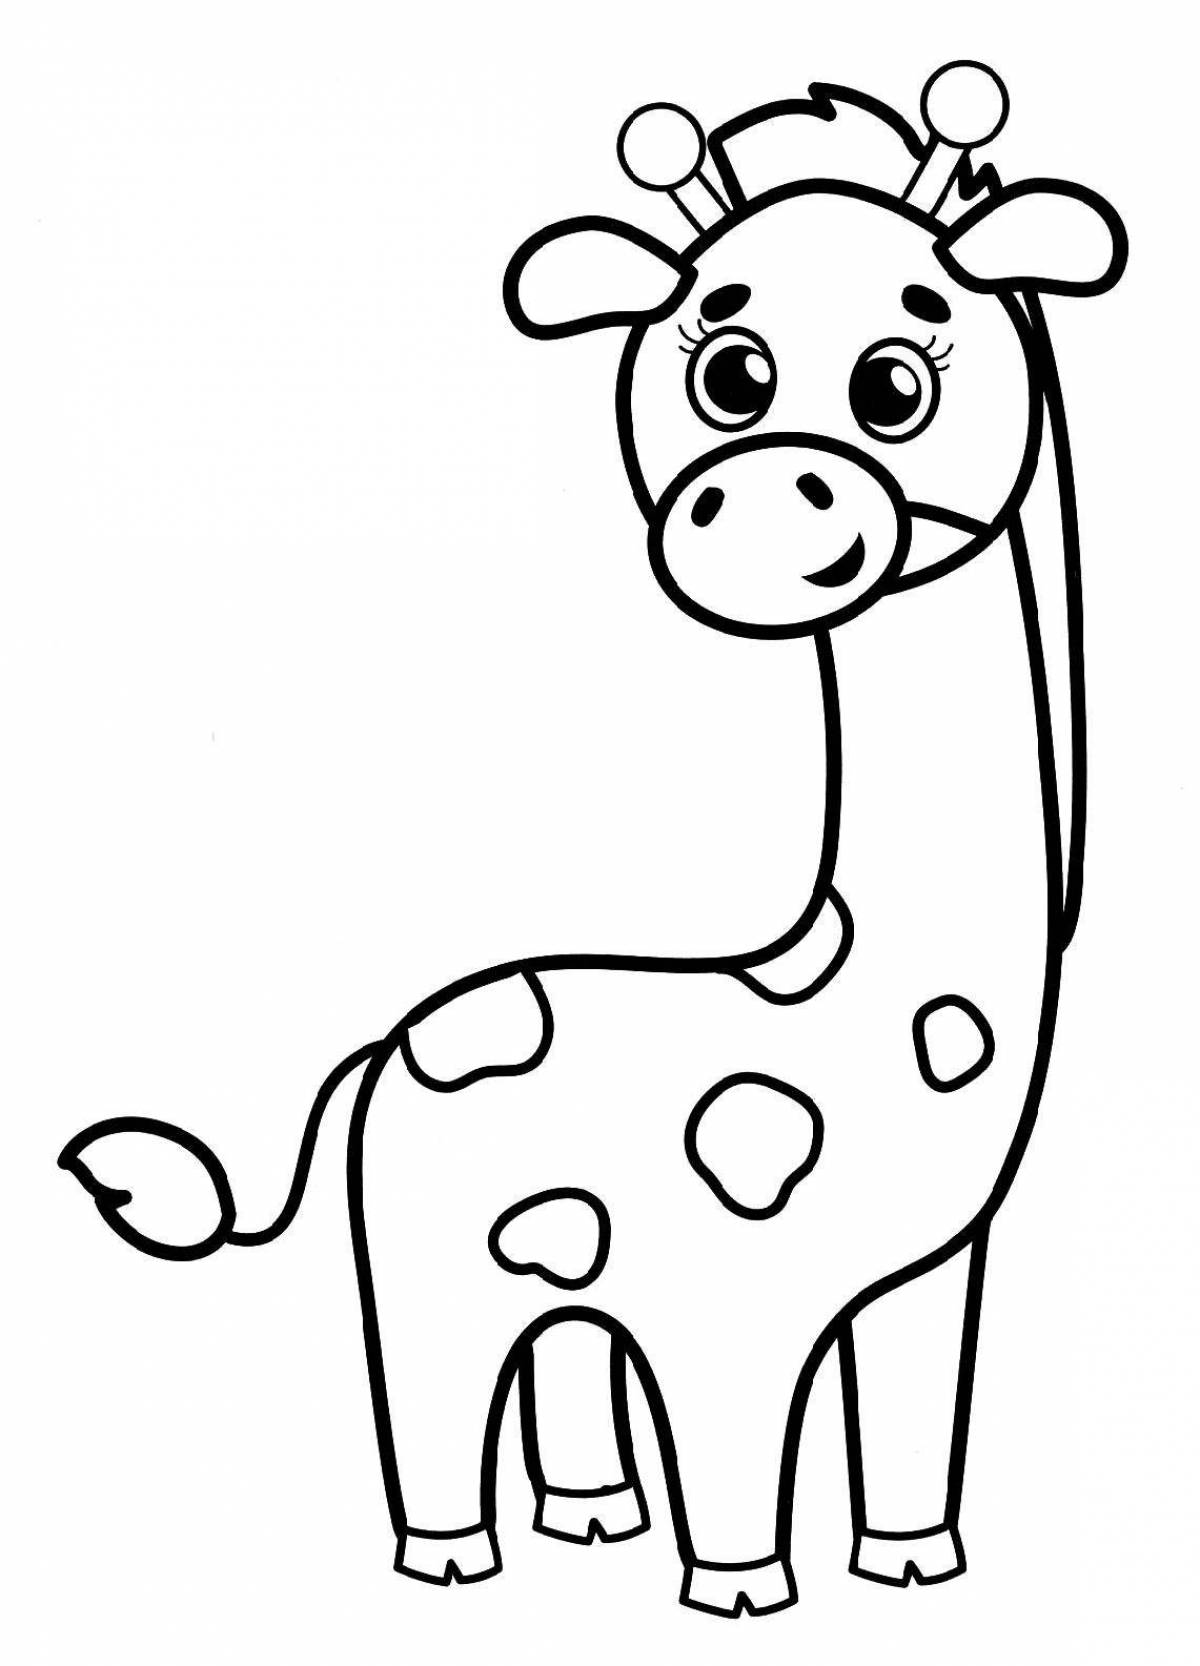 Funny giraffe without spots for kids